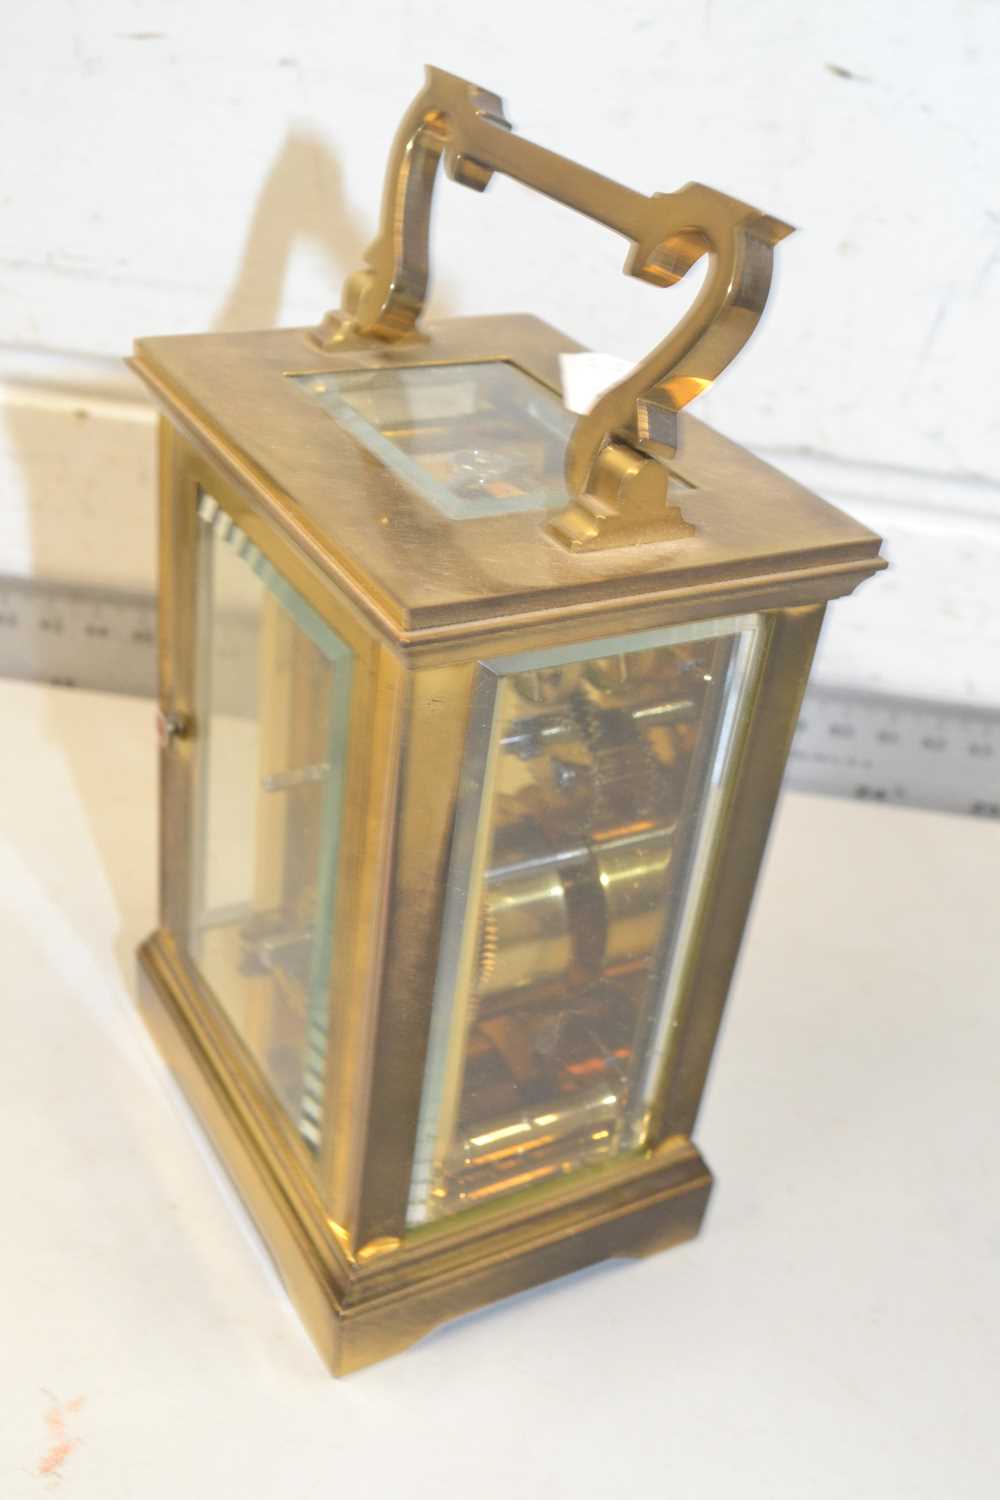 Small brass cased carriage clock by Mappin & Webb - Image 2 of 2